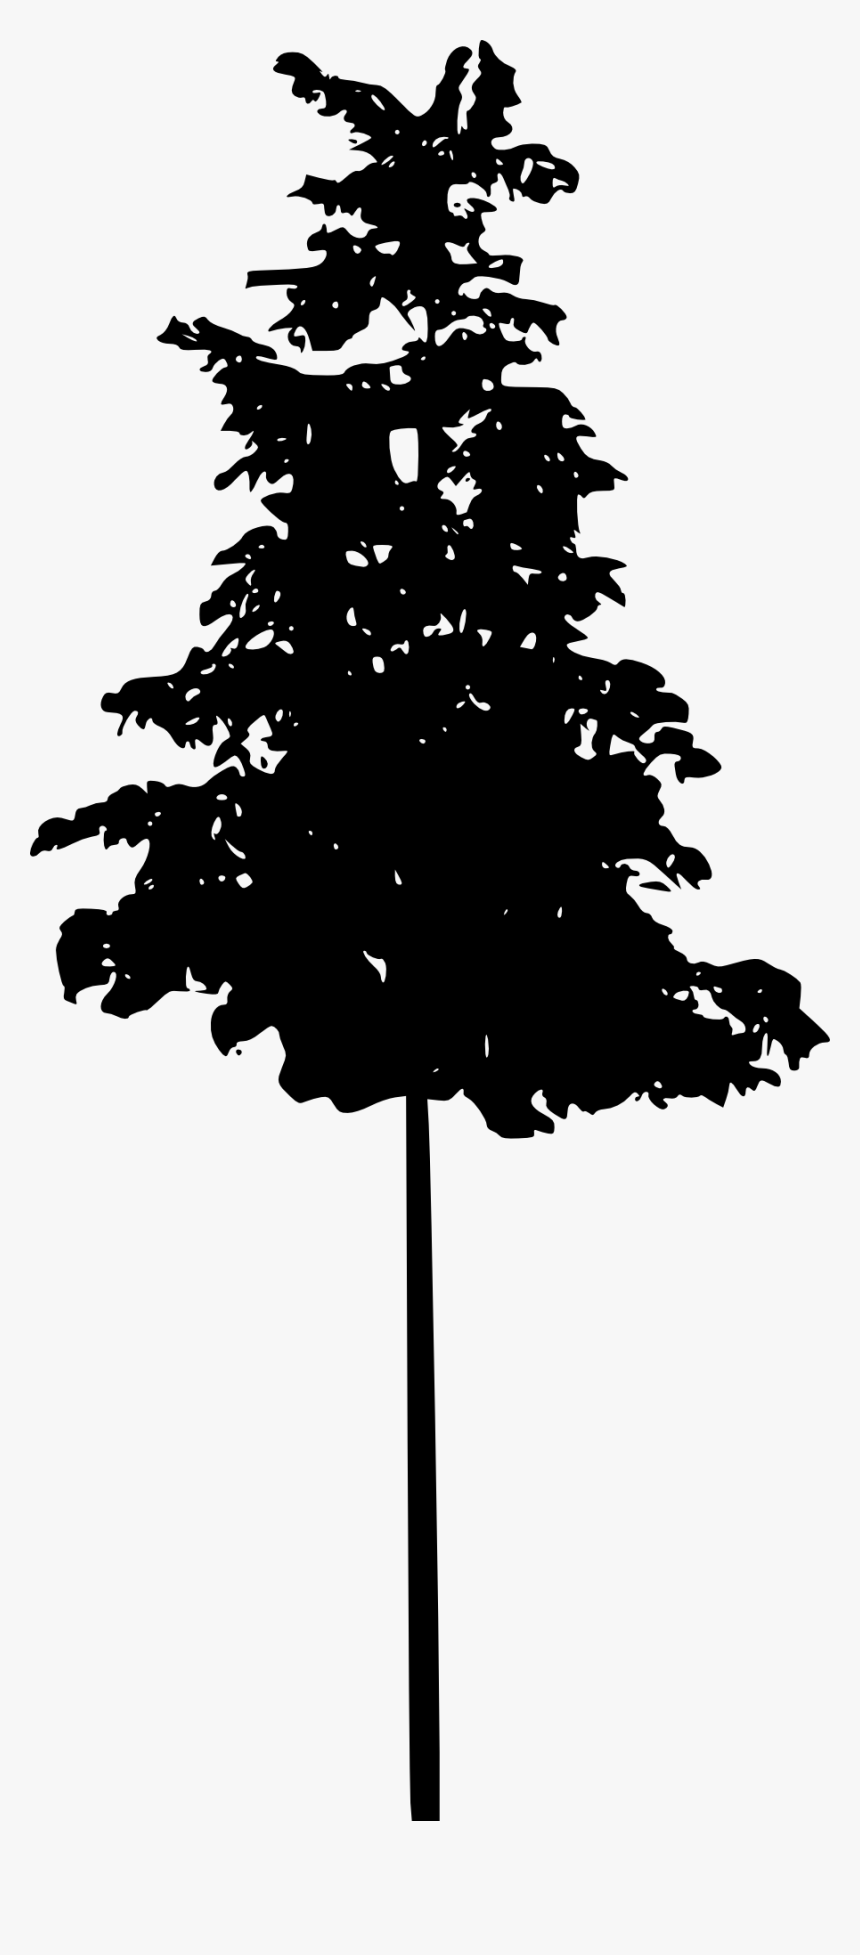 Tree Silhouette 2 - Dark Pine Tree Png, Transparent Png, Free Download